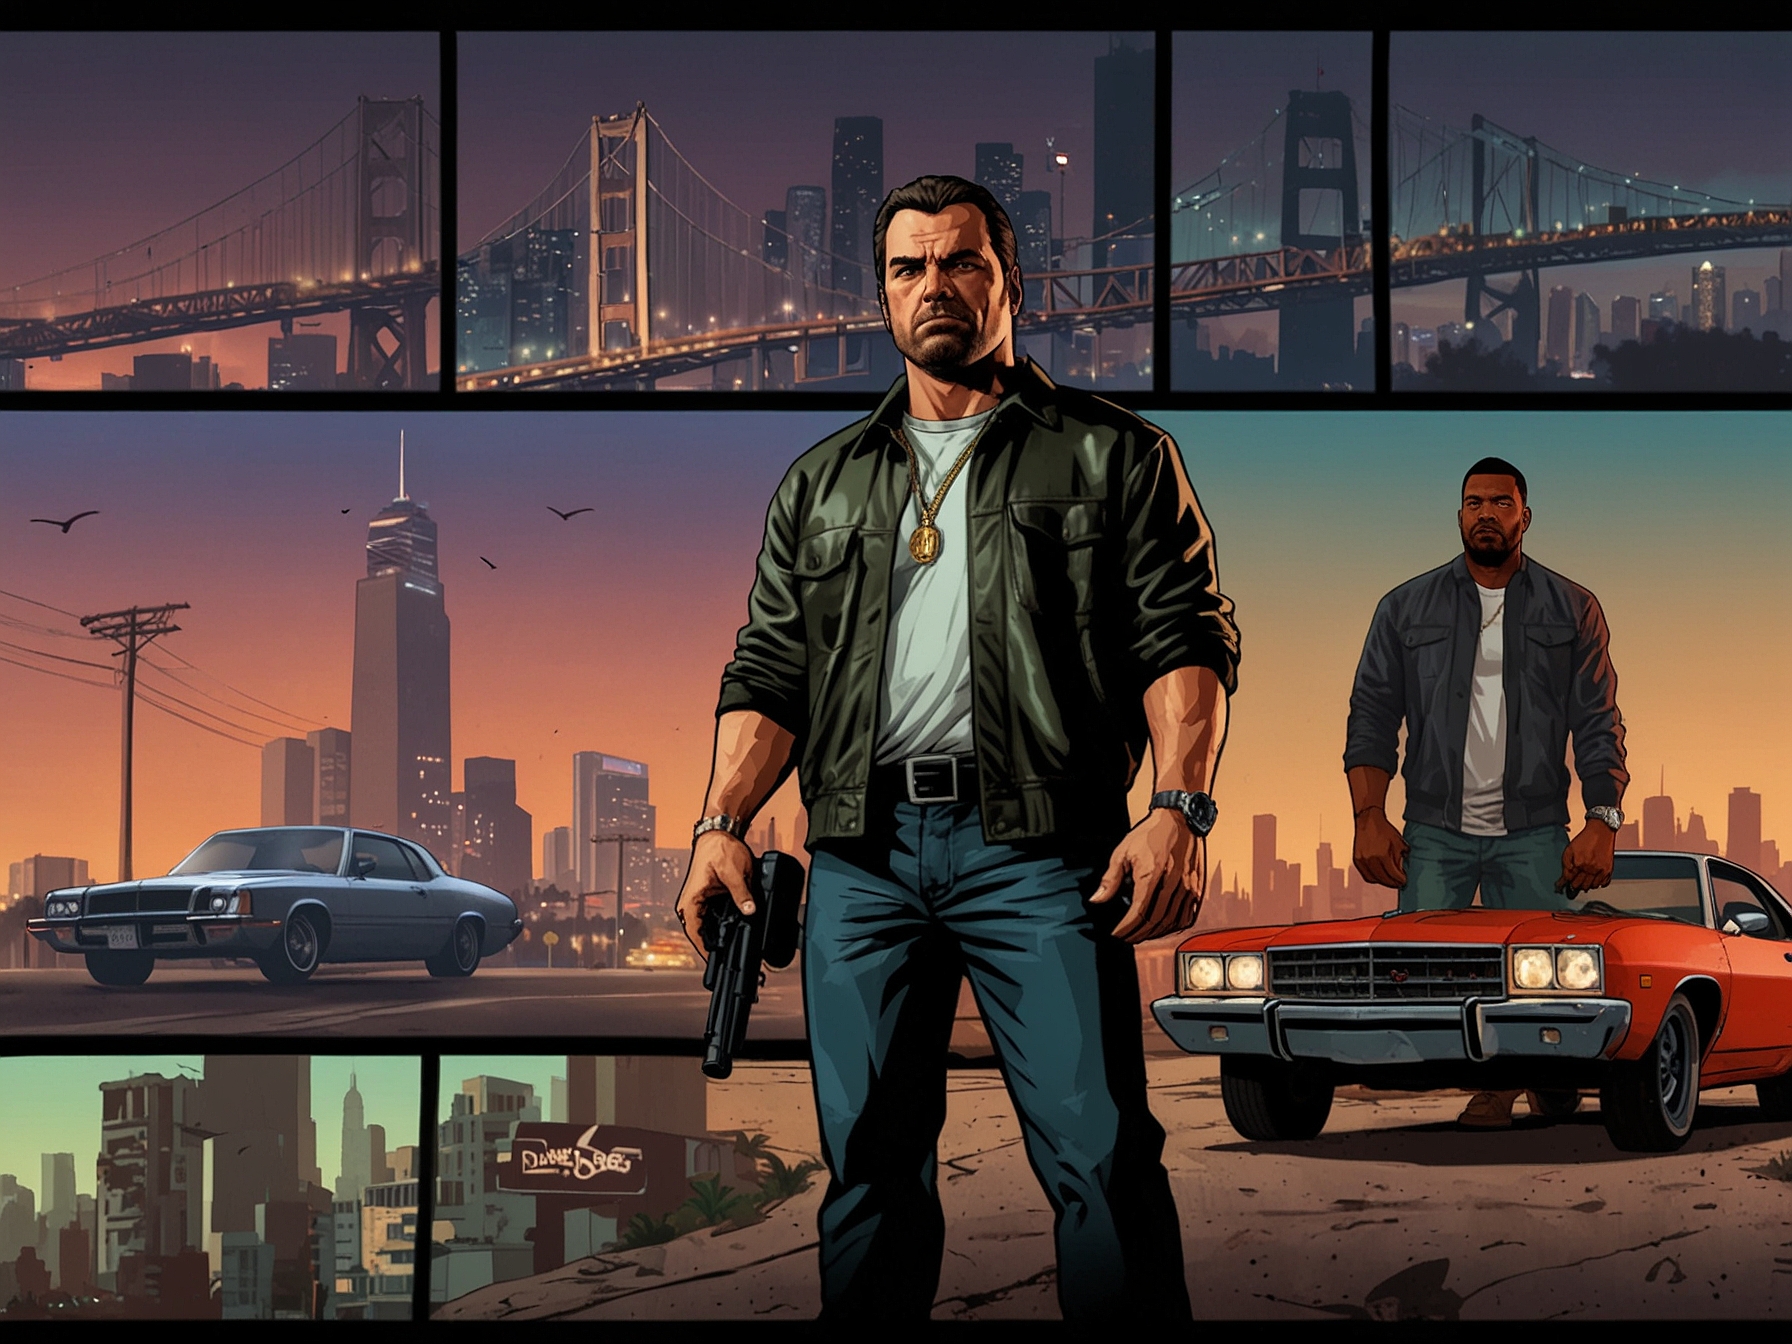 A screenshot of the GTA Trilogy interface on a Netflix-compatible device, showcasing the iconic game covers of Grand Theft Auto III, Vice City, and San Andreas, illustrating their availability on the streaming platform.